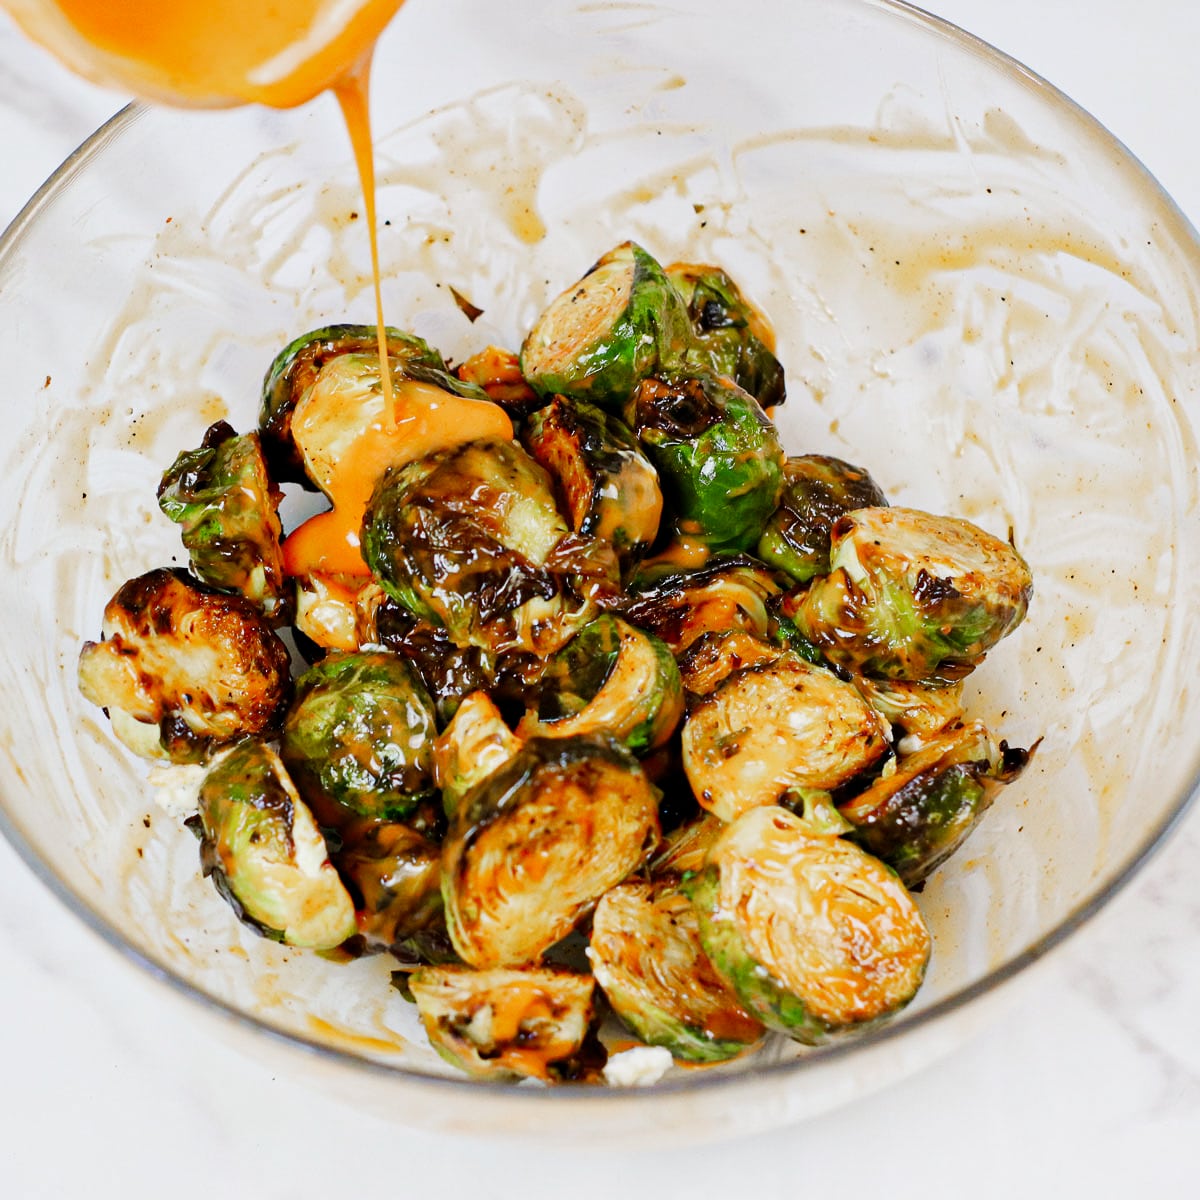 Coating air fried Brussels sprouts with buffalo sauce